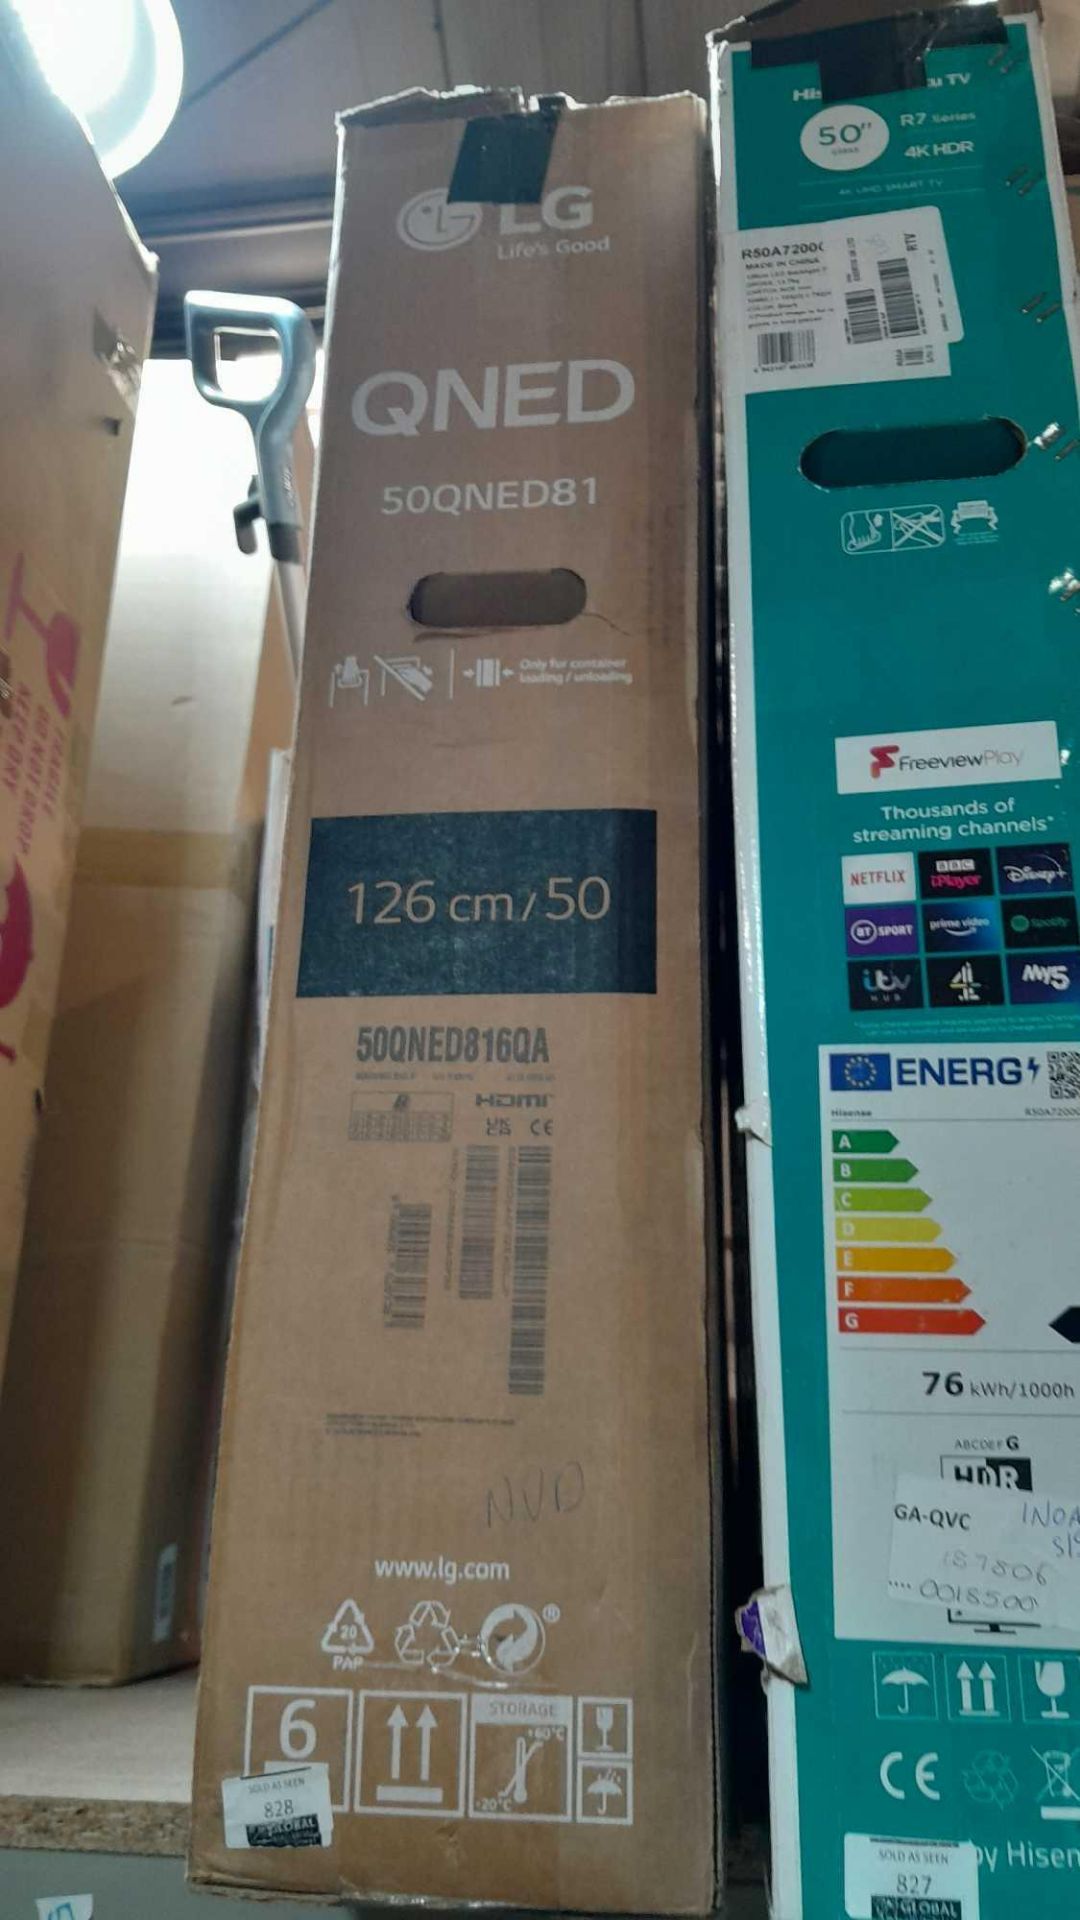 RRP £650 Boxed Lg 50Qned81 50" 4K Smart Tv - Image 2 of 2